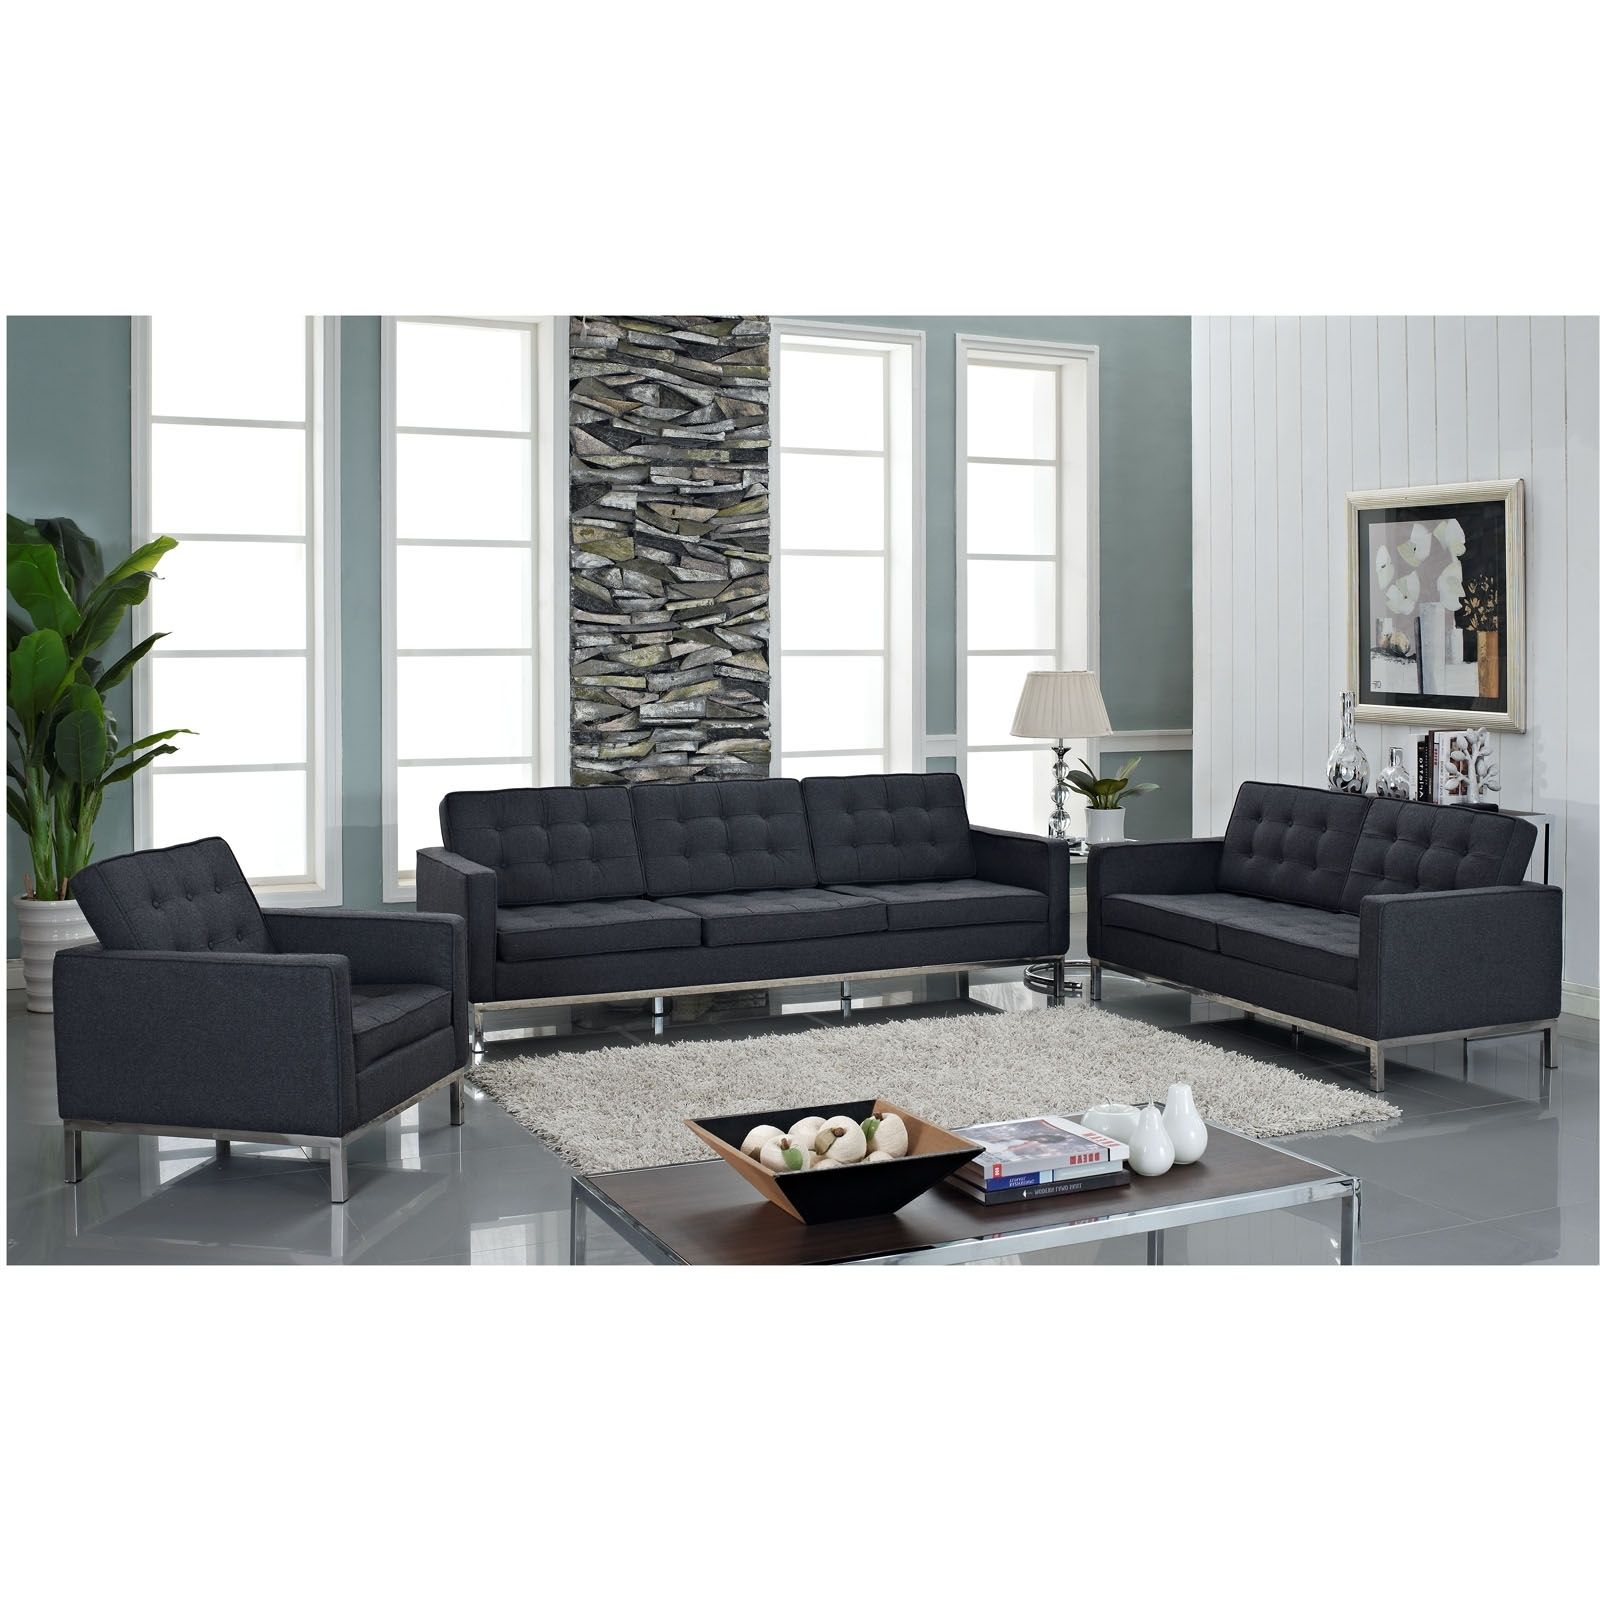 Florence Knoll Style Sofa Couch – Wool Within Most Up To Date Florence Knoll Living Room Sofas (View 14 of 15)